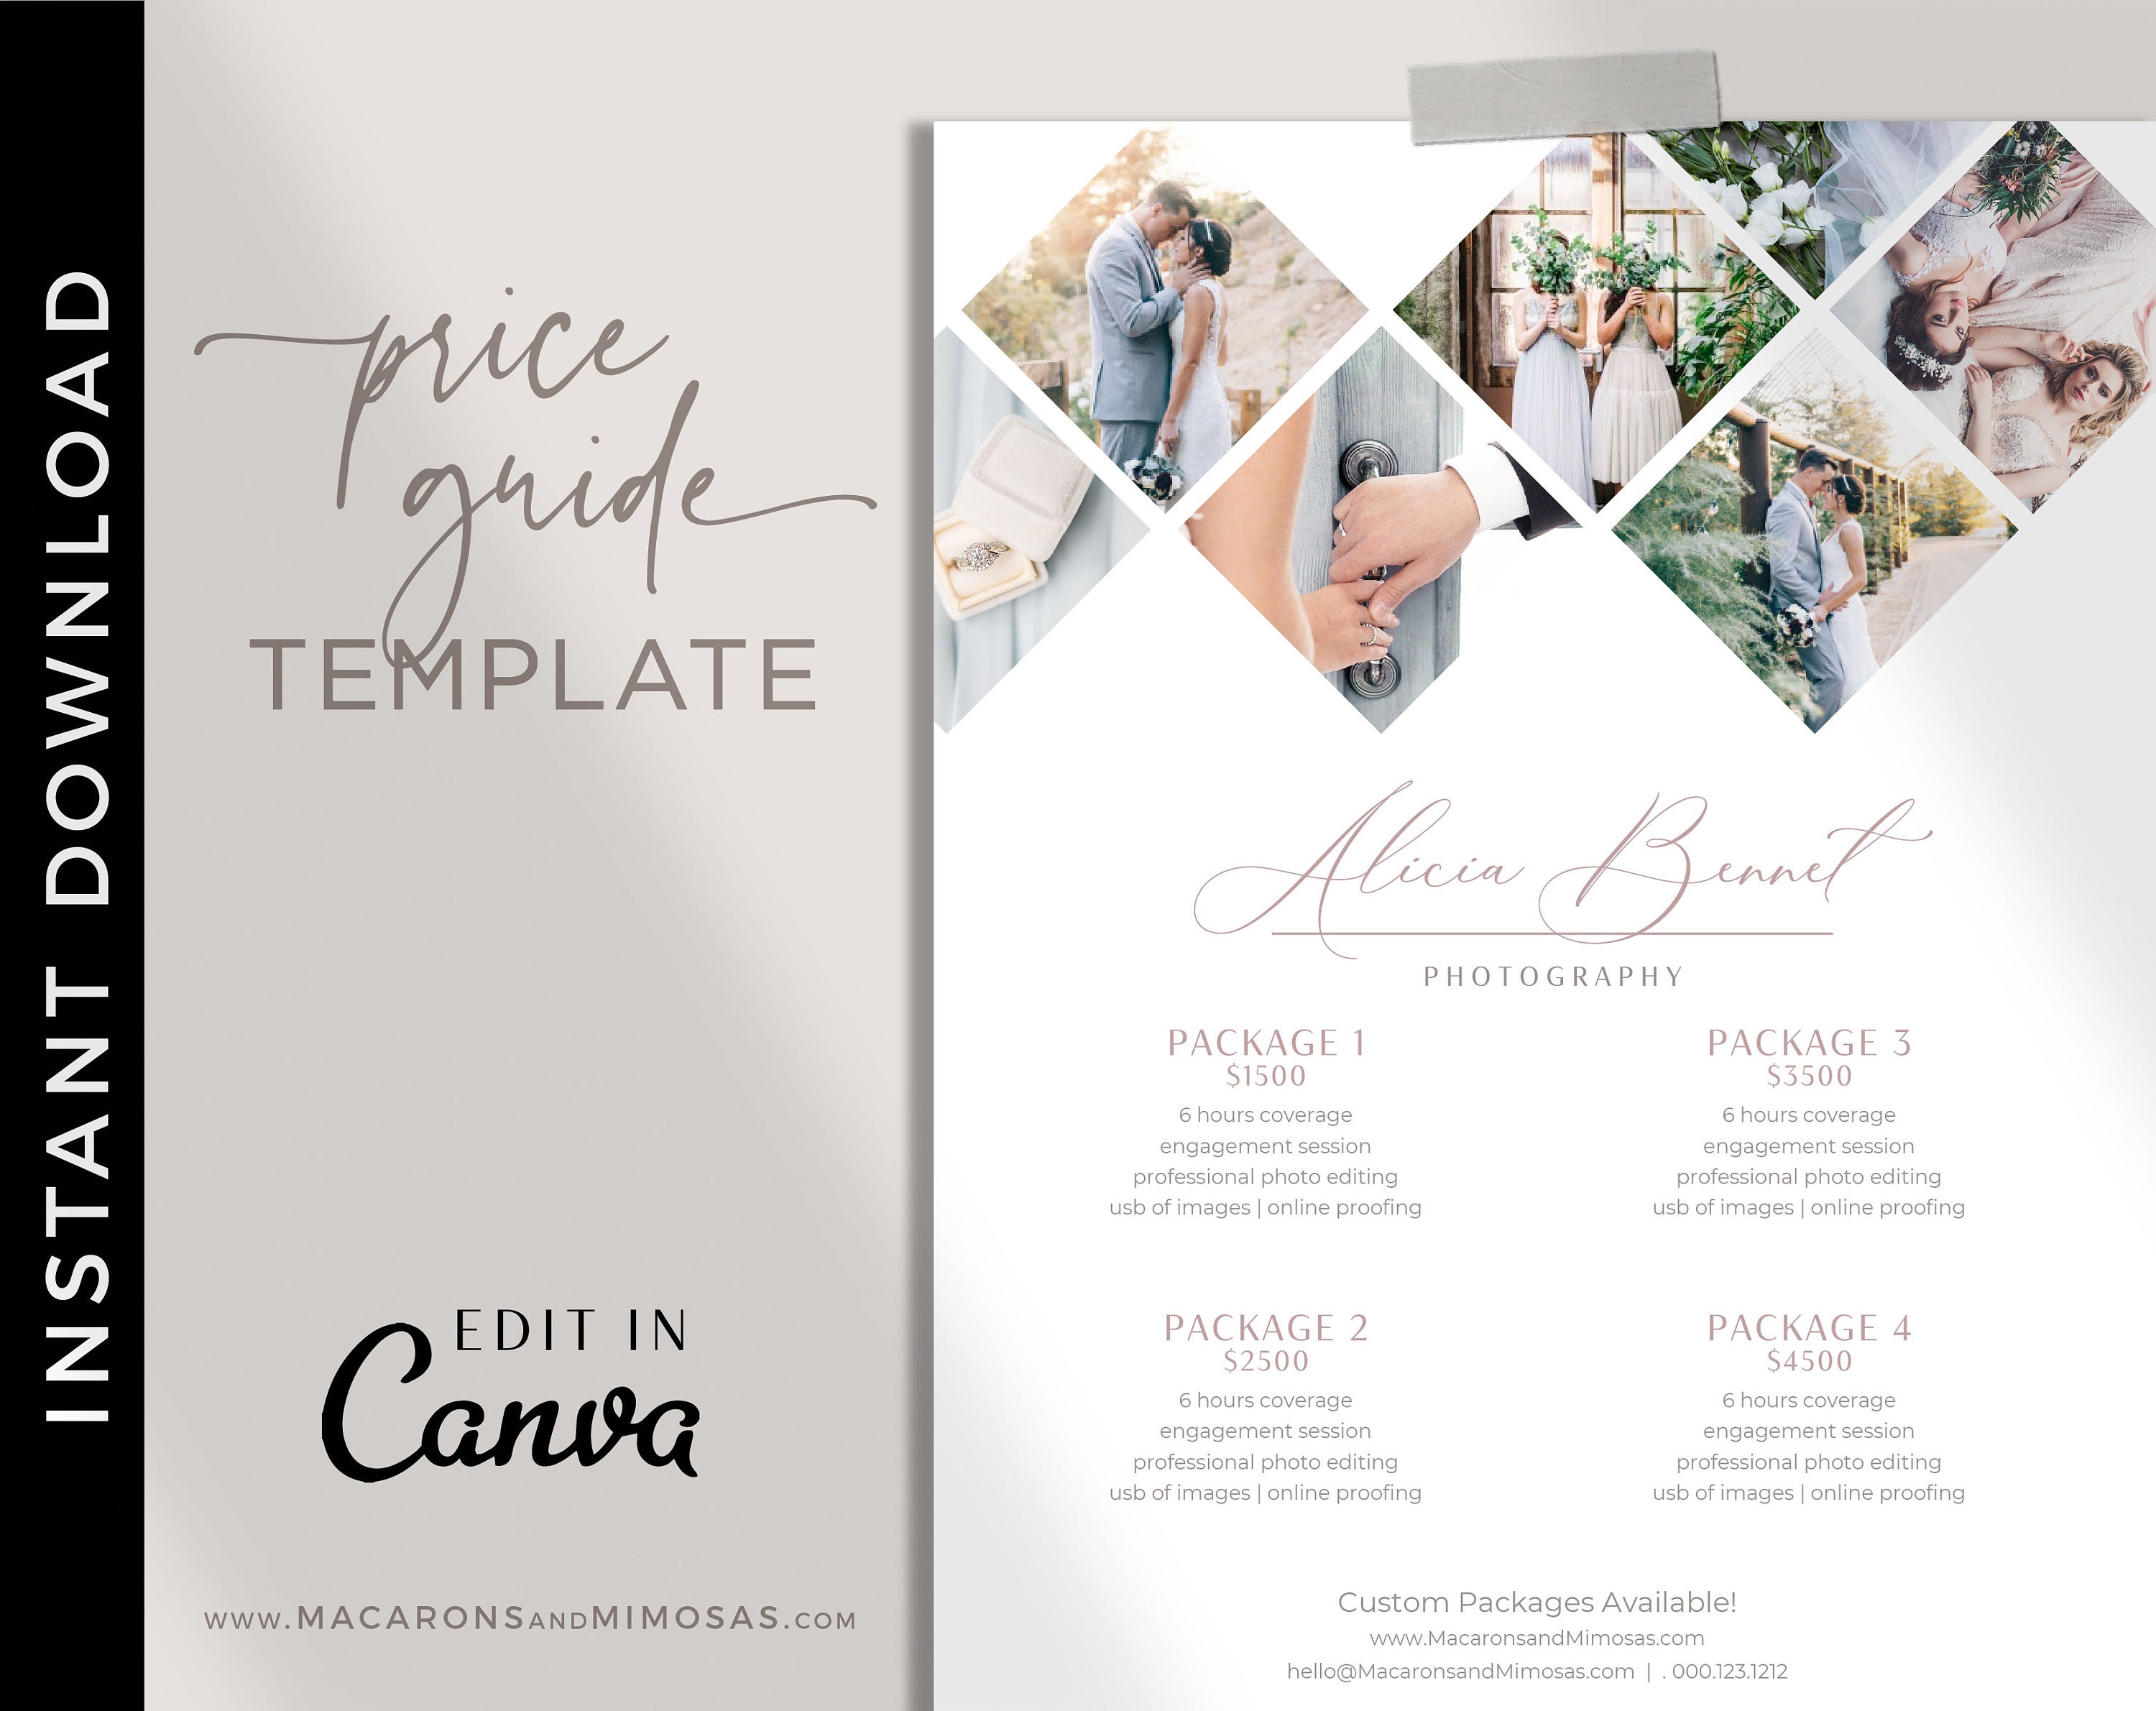 Live Wedding Canva Template Photography Price List Pricing Guide Design